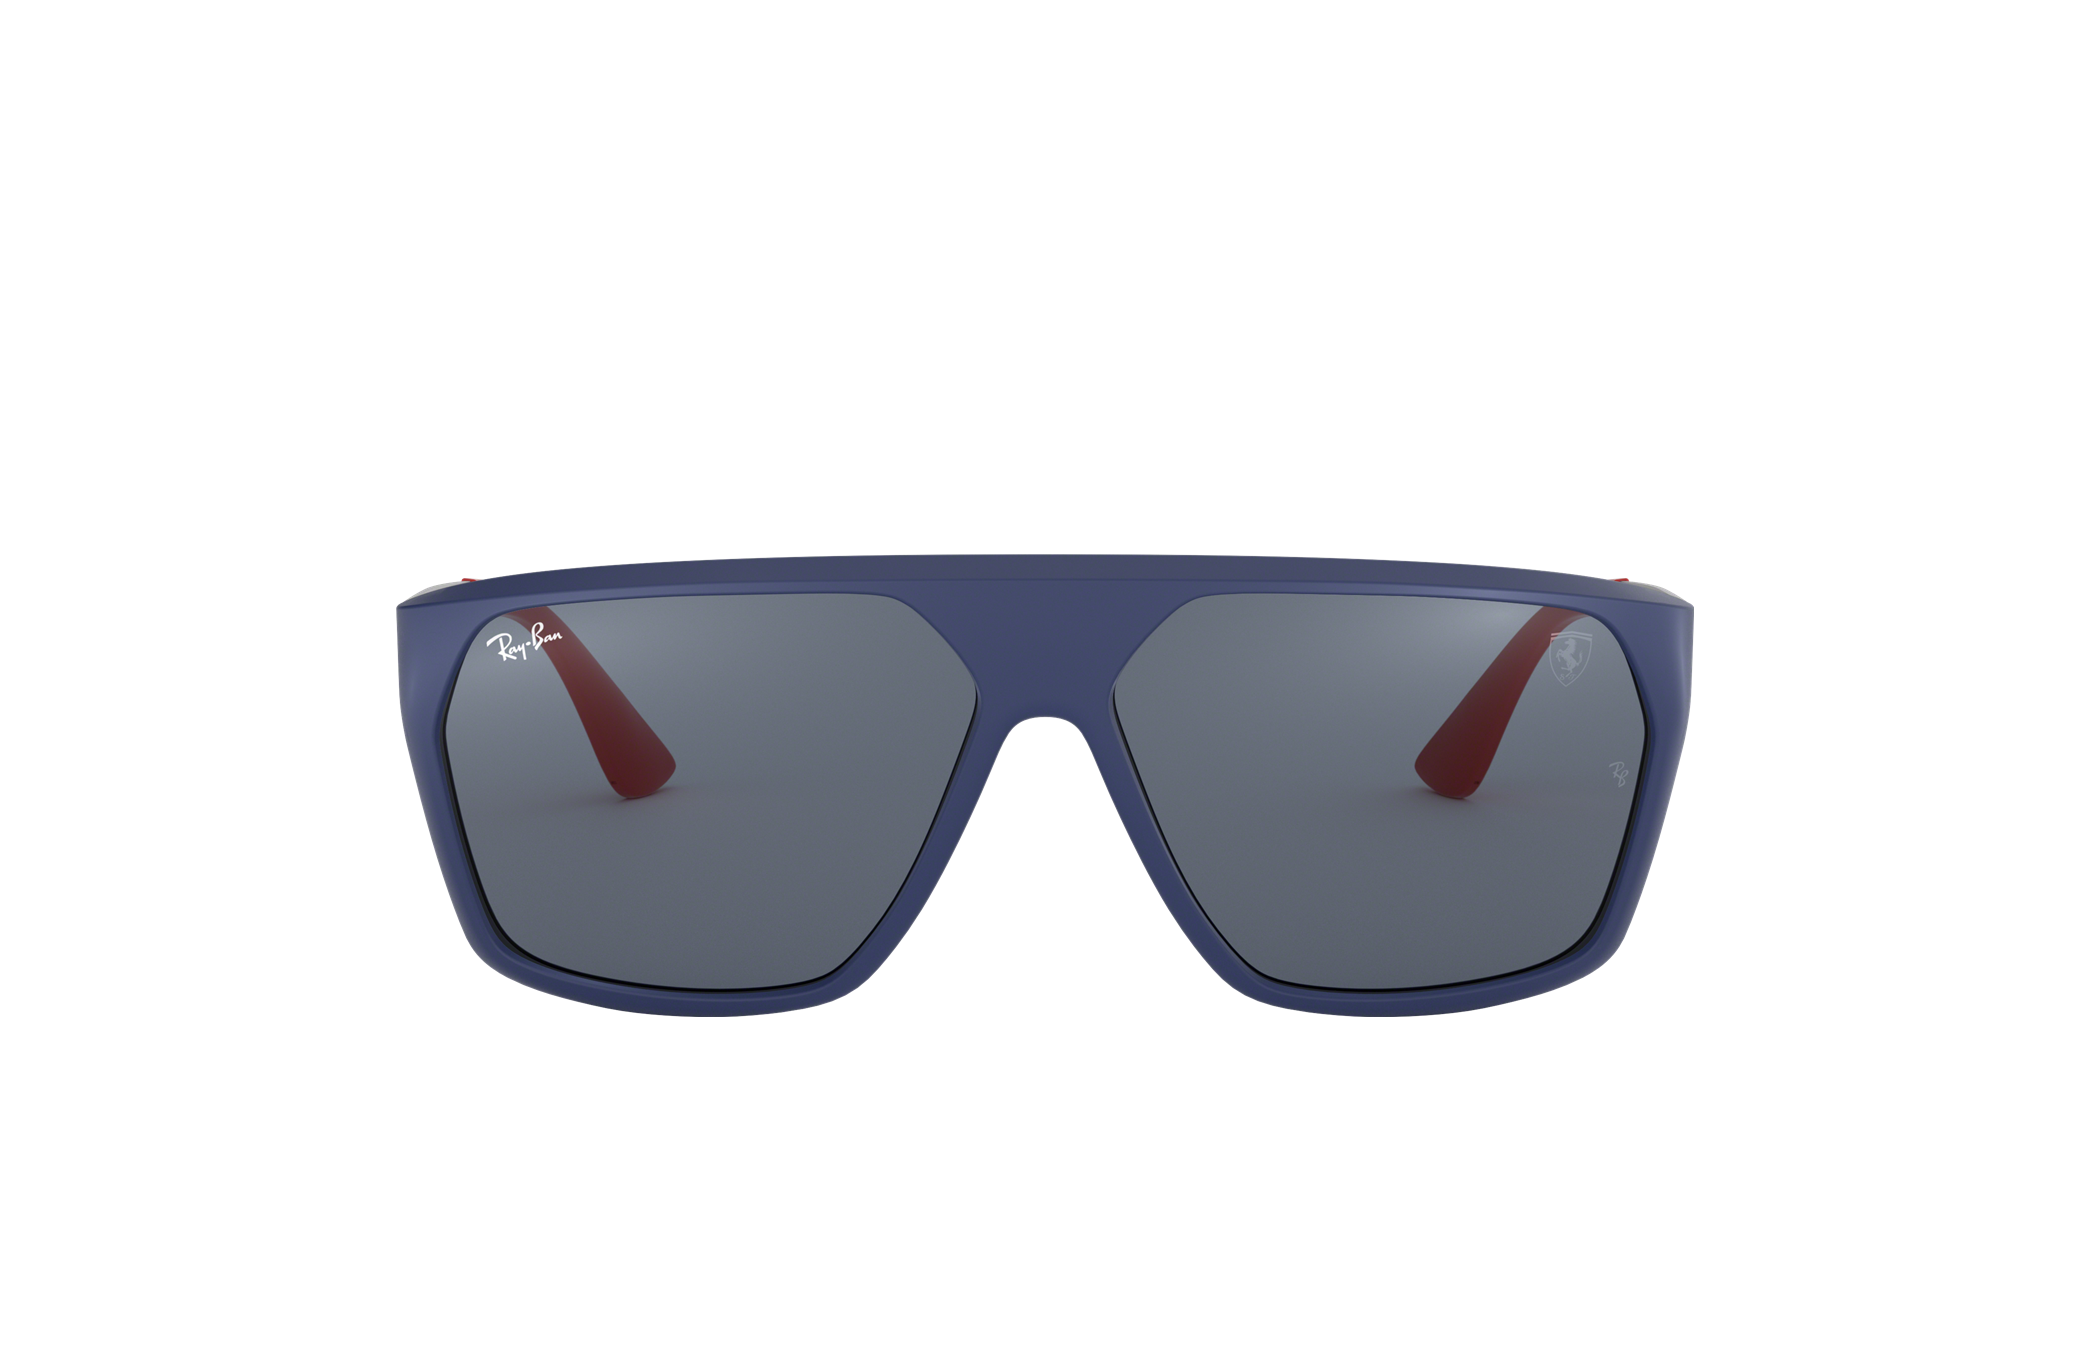 ray ban ferrari collection price in india